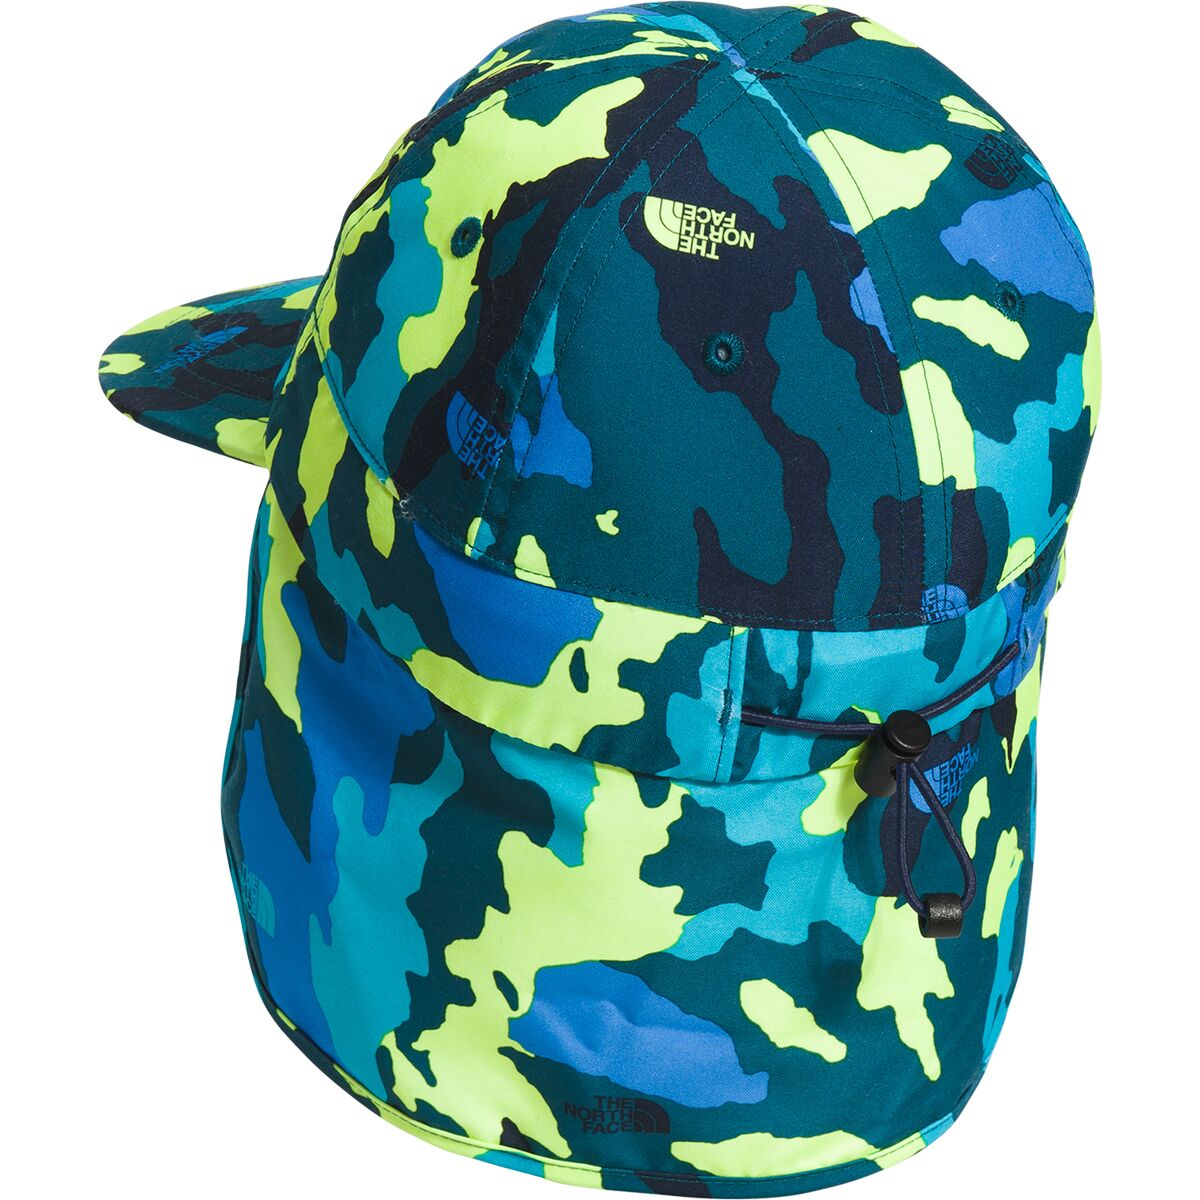 THE NORTH FACE CLASS V SUNSHIELD HAT – Wind River Outdoor